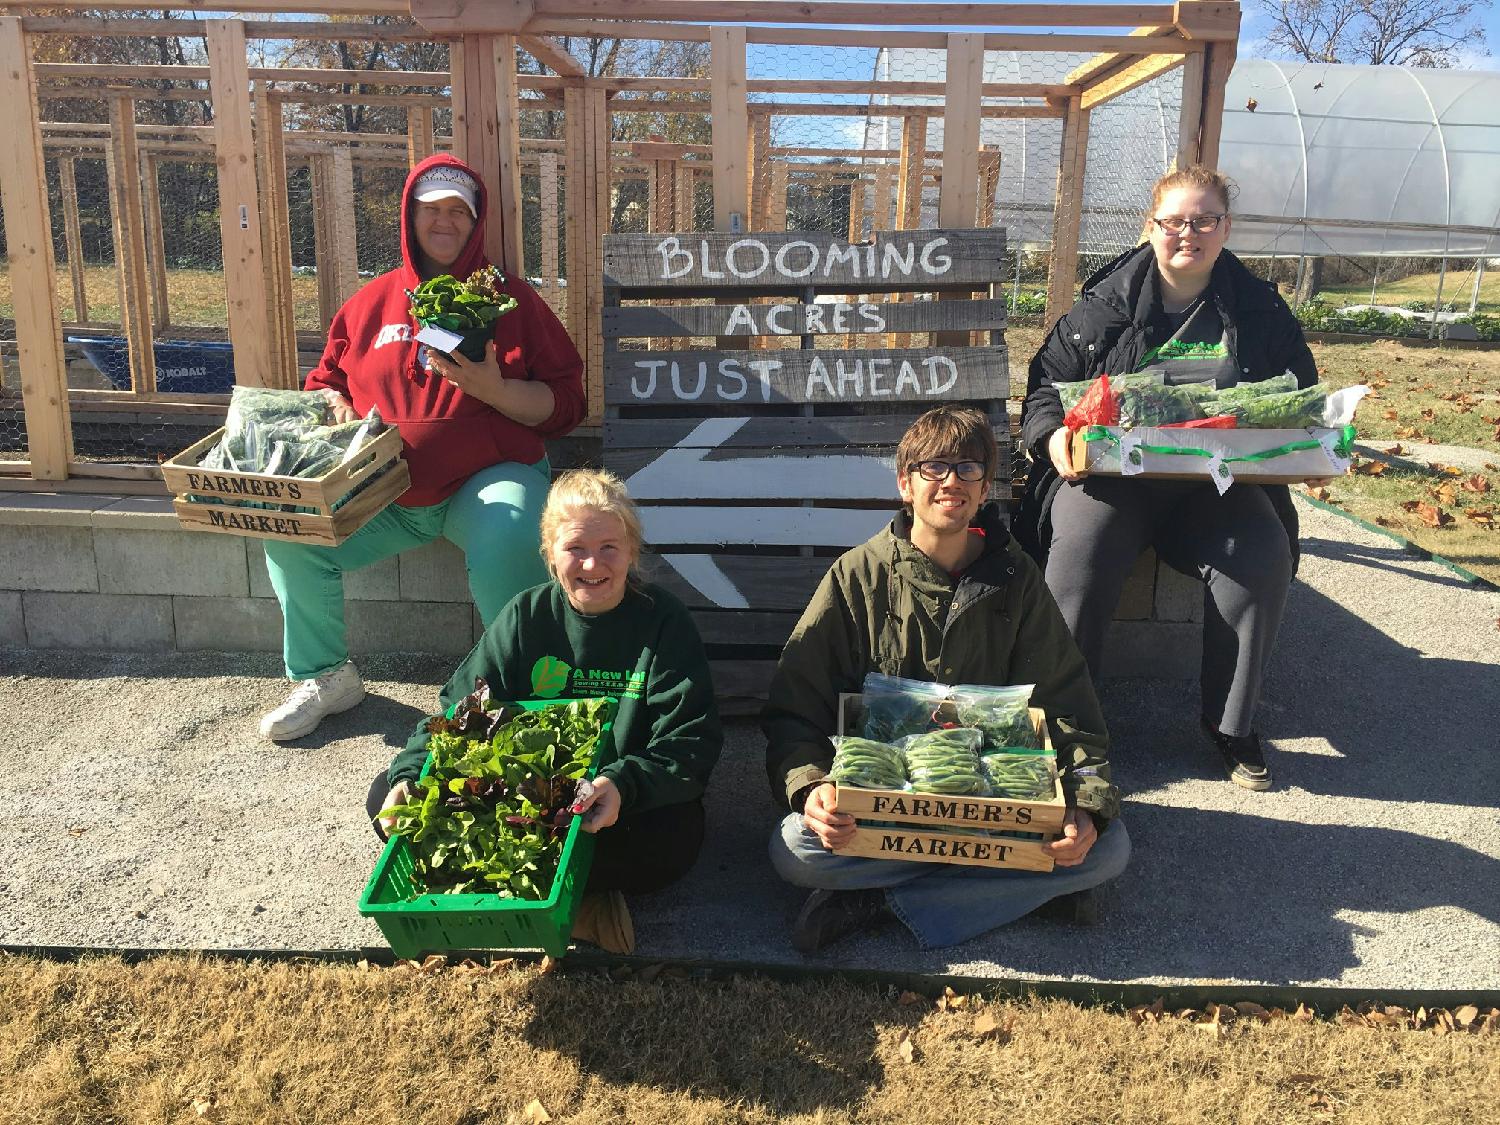 A New Leaf delivers produce to the community at large from Blooming Acres where they plant, care for, and harvest.